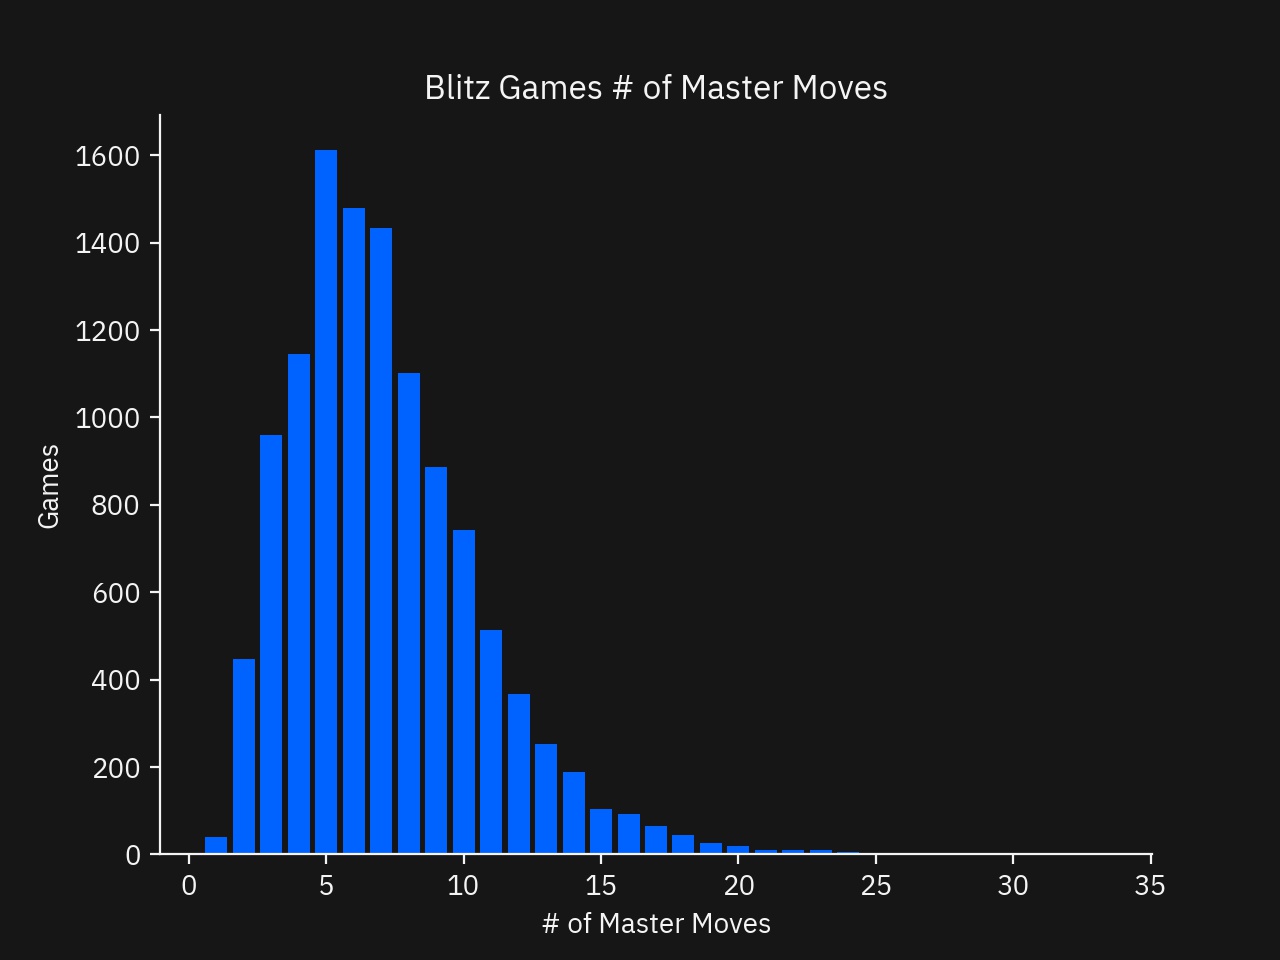 Bar graph of the number of games played grouped by the number of Master moves featured for Blitz games